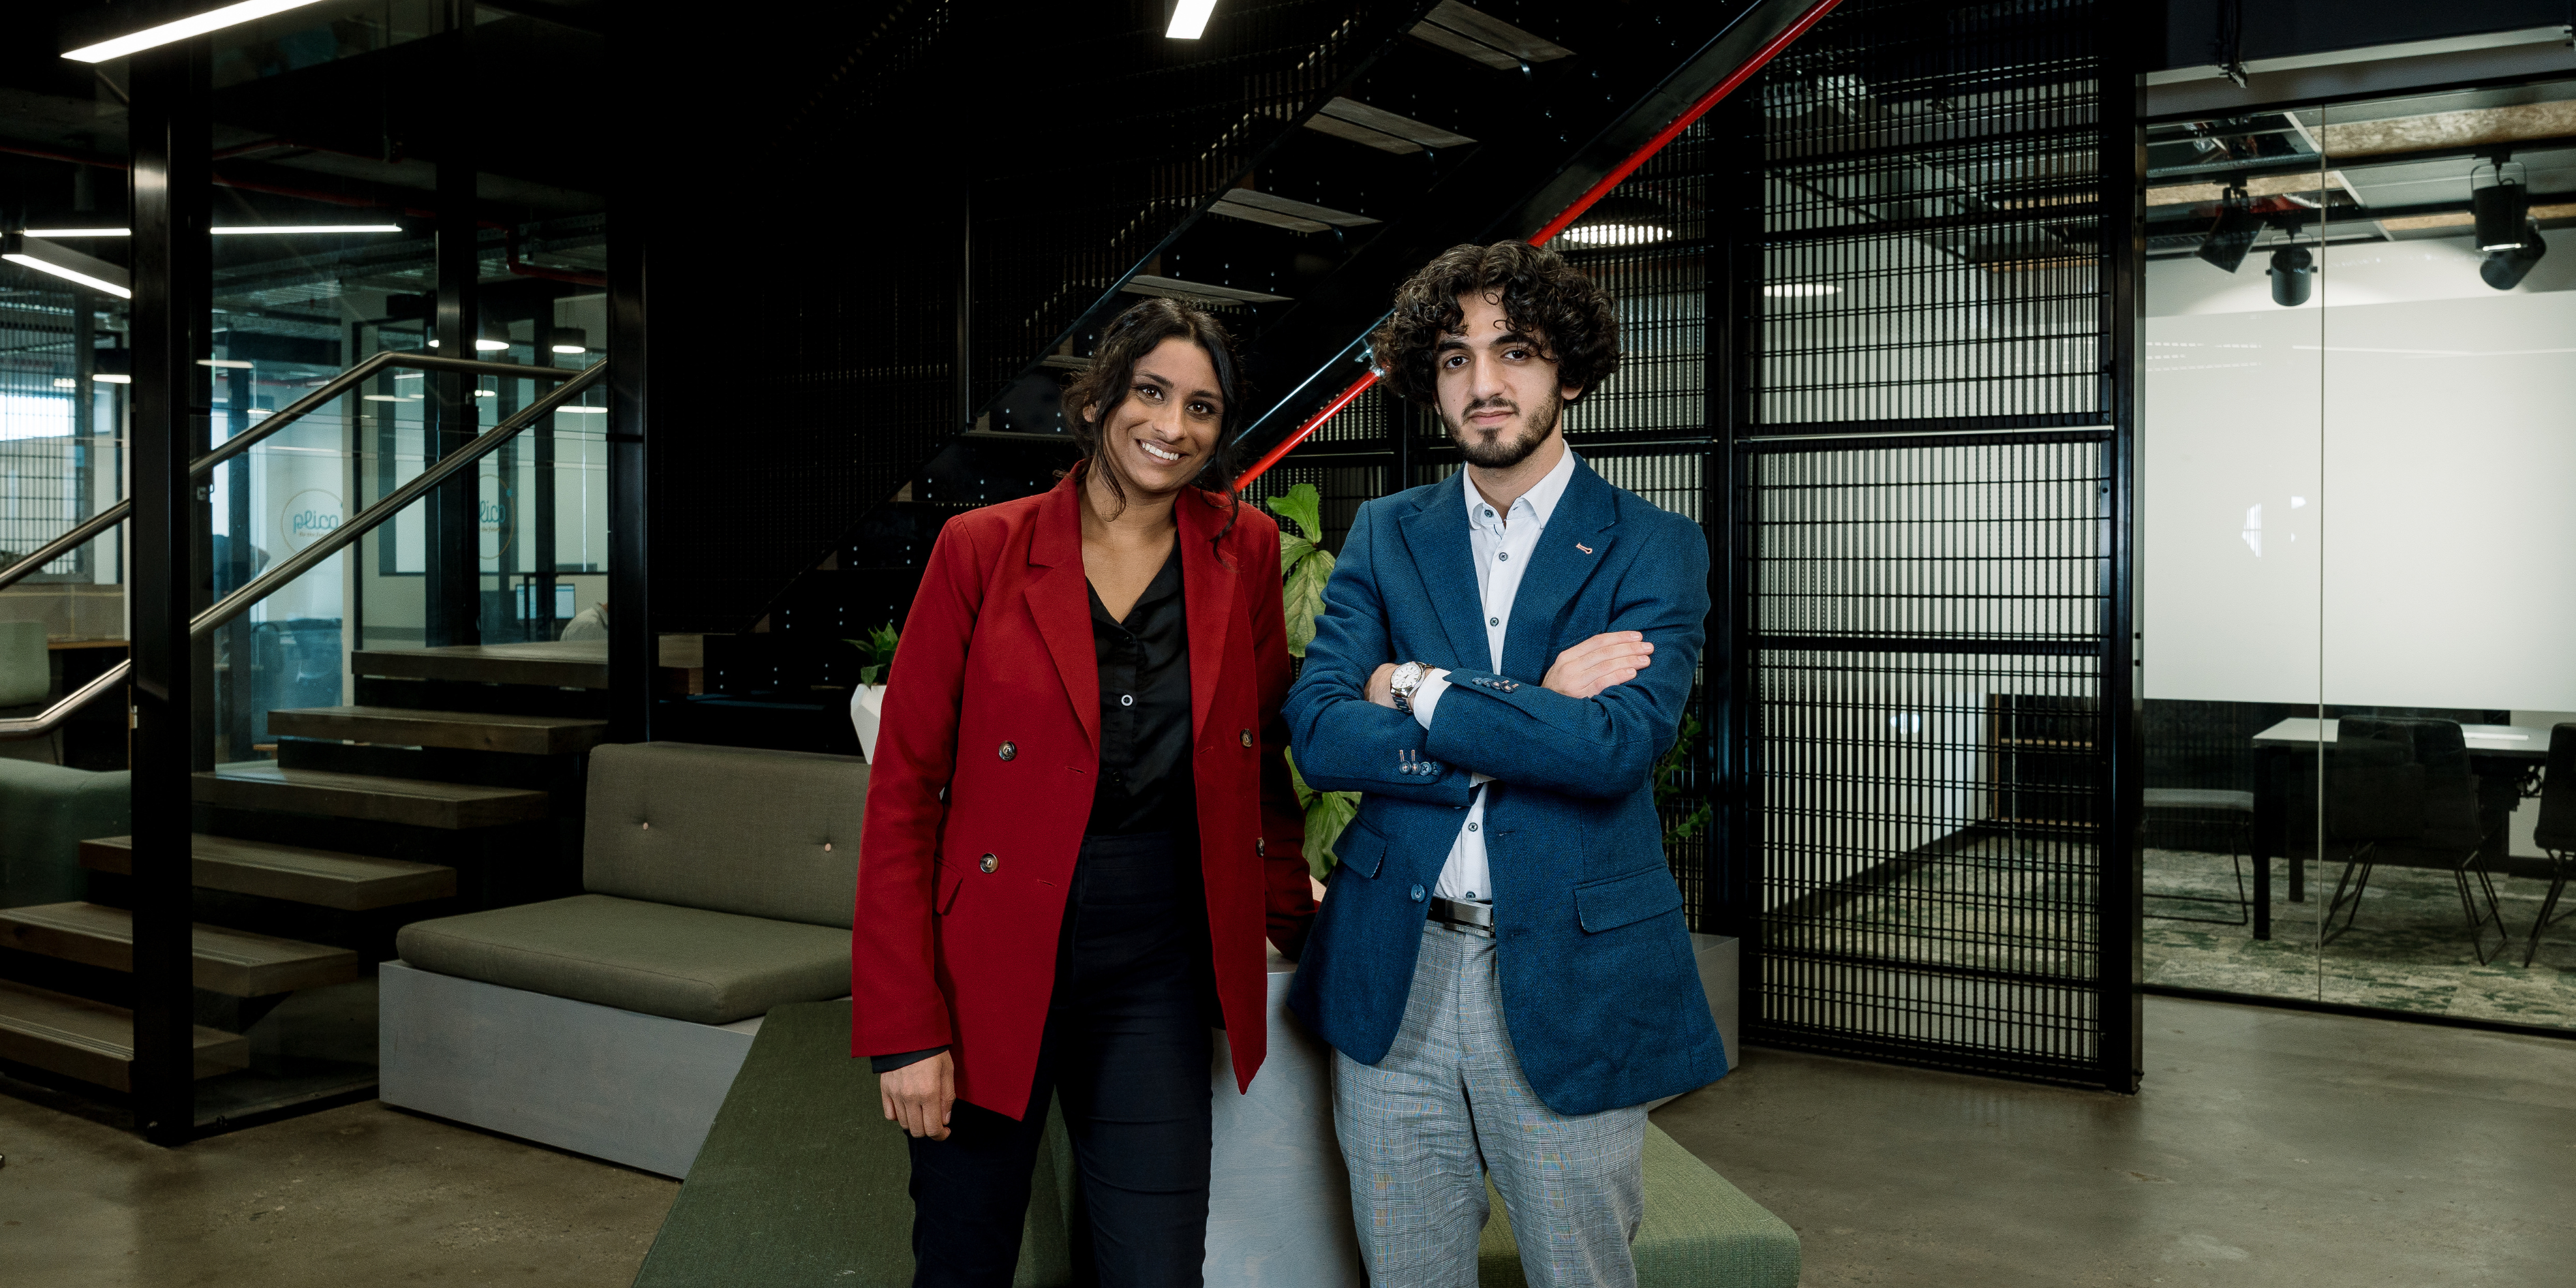 Get to know Carsona Founders, Desiree Louis and Ali Al-Asadi, who are part of Phase One of Plus Eight Accelerator program